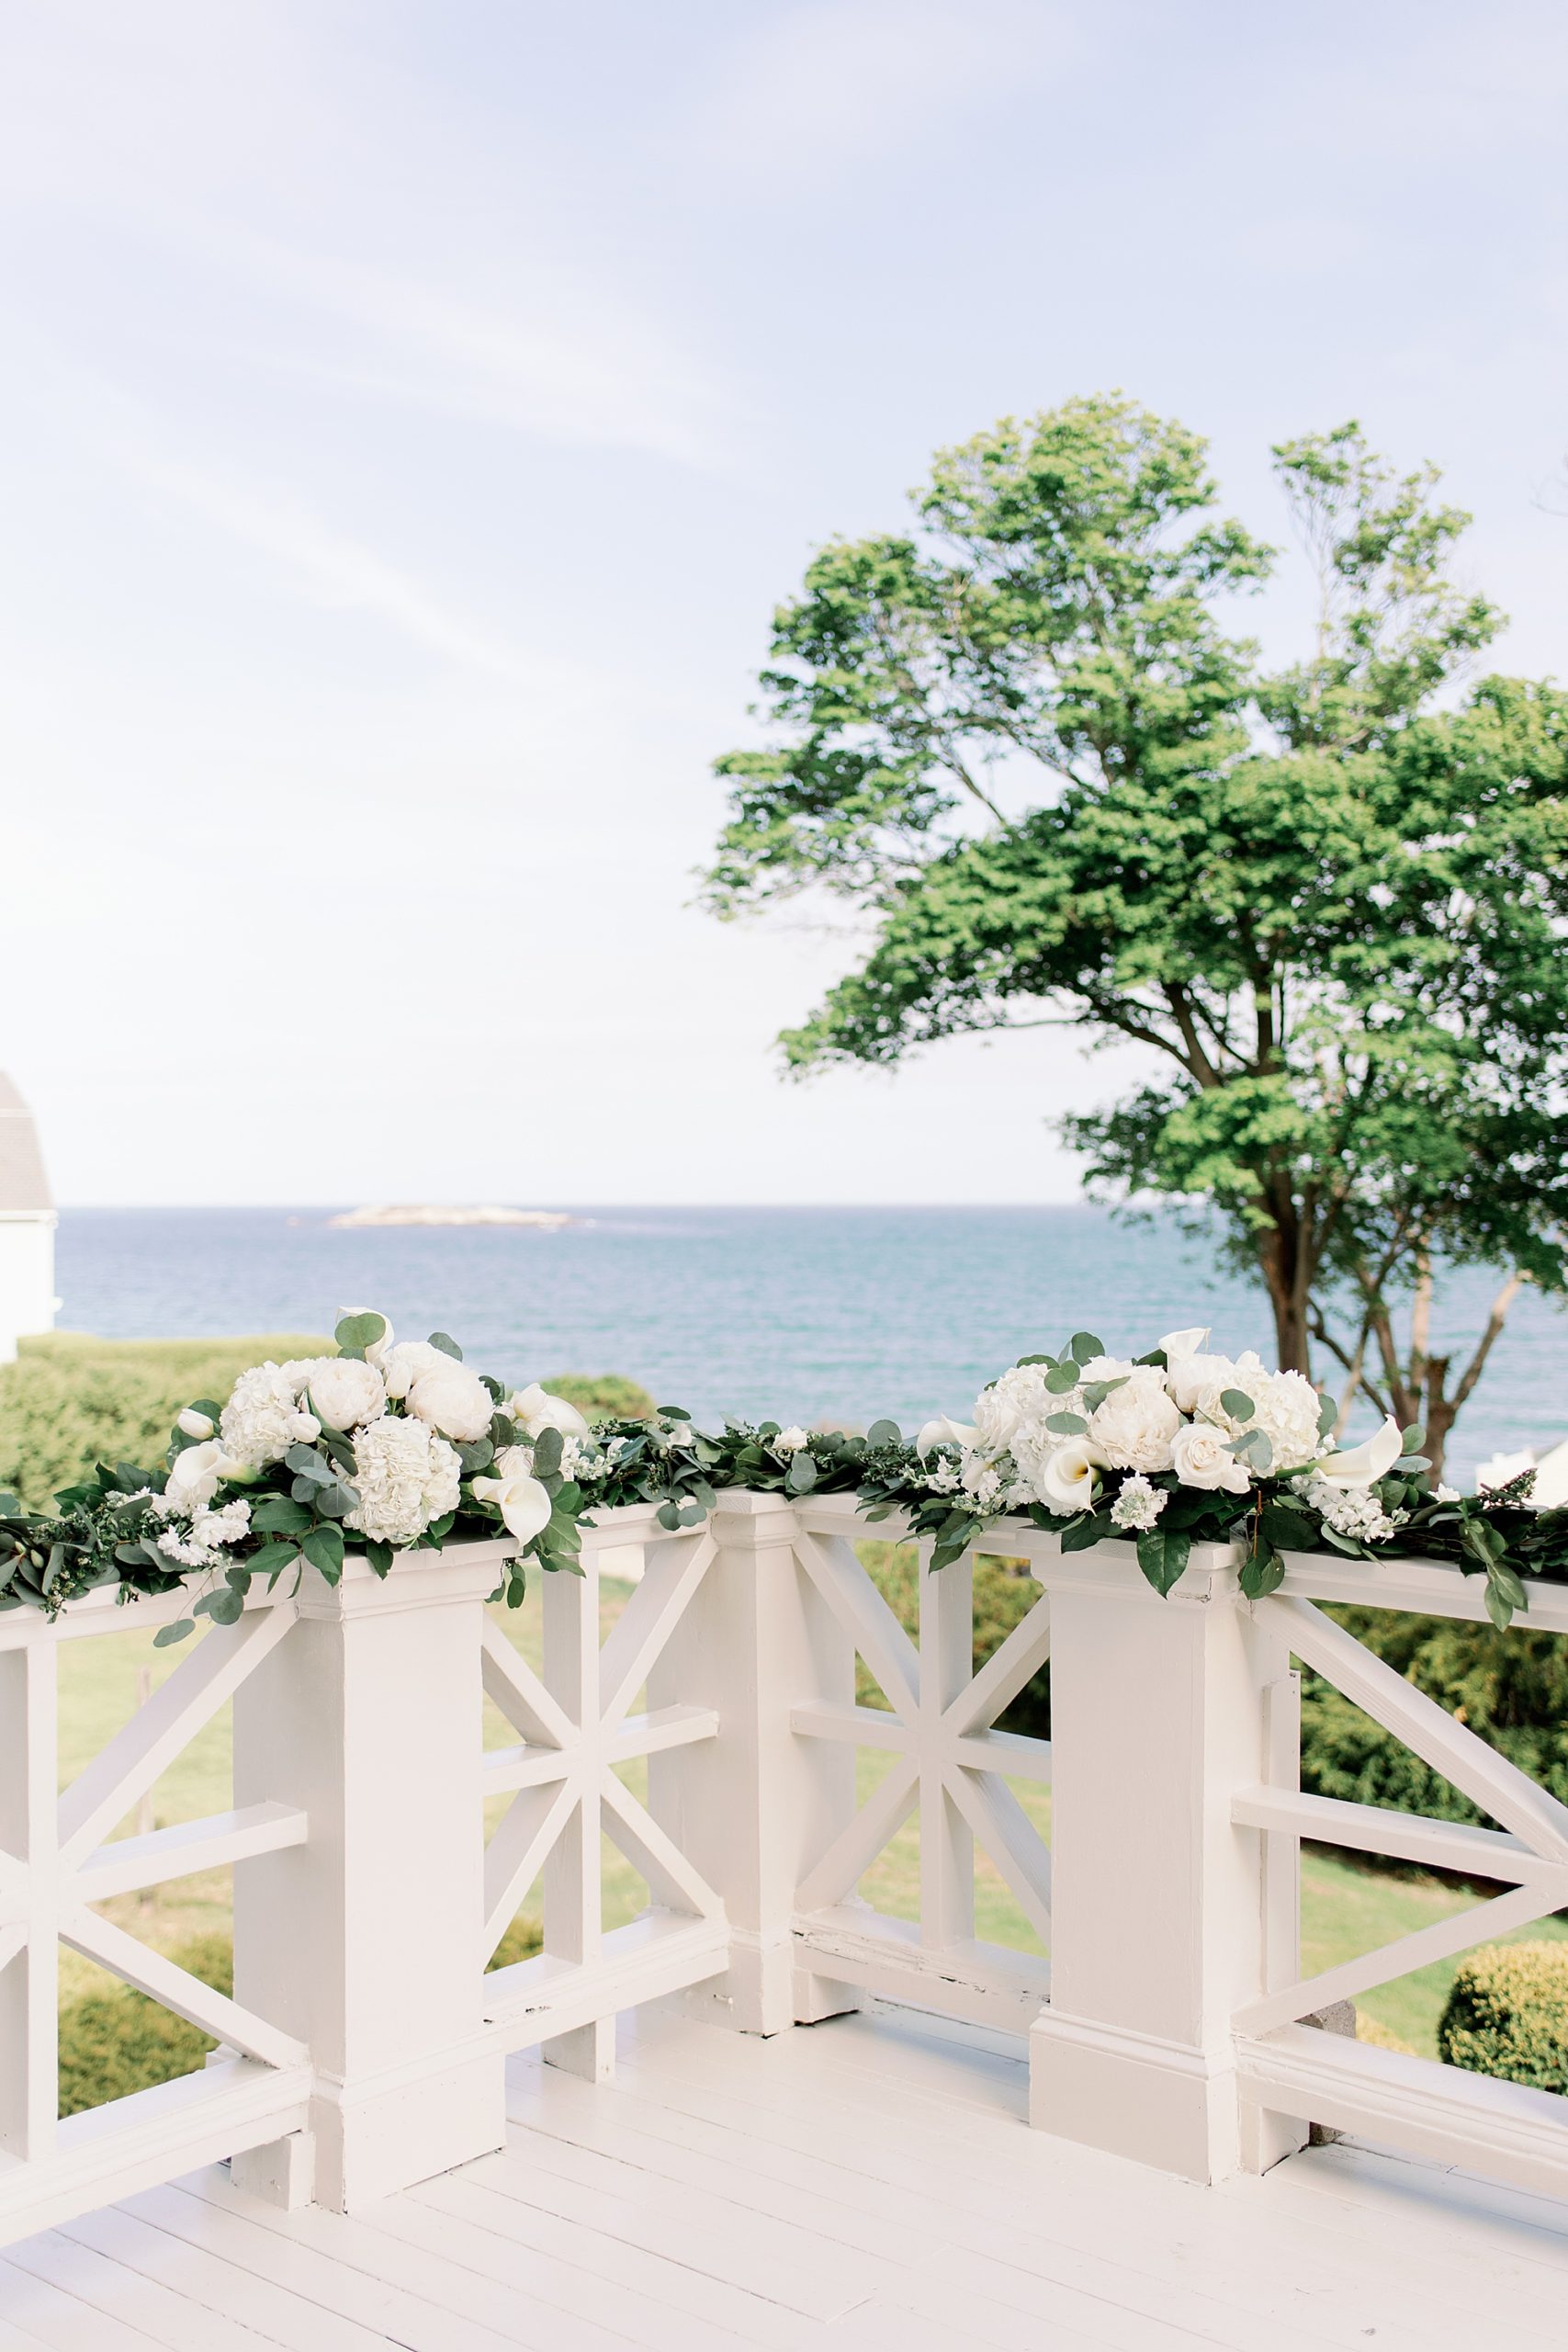 whites and greenery wedding ceremony backdrop flowers on railing of deck with view of water